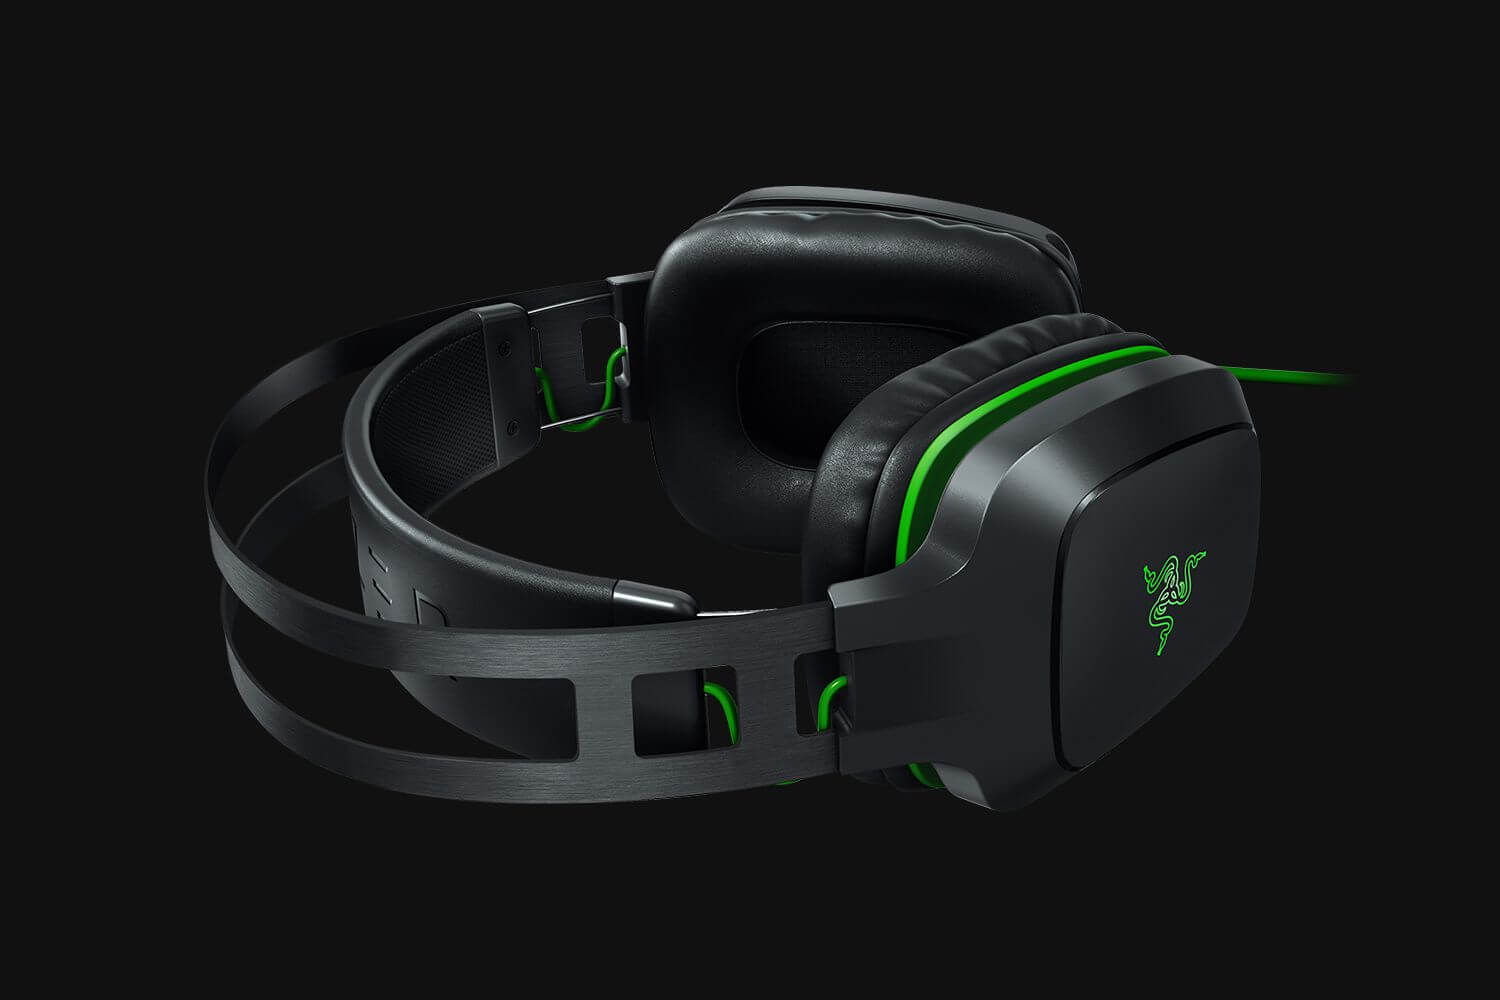 Razer Updates Electra V2 Headset Bringing High End Features to the Mainstream